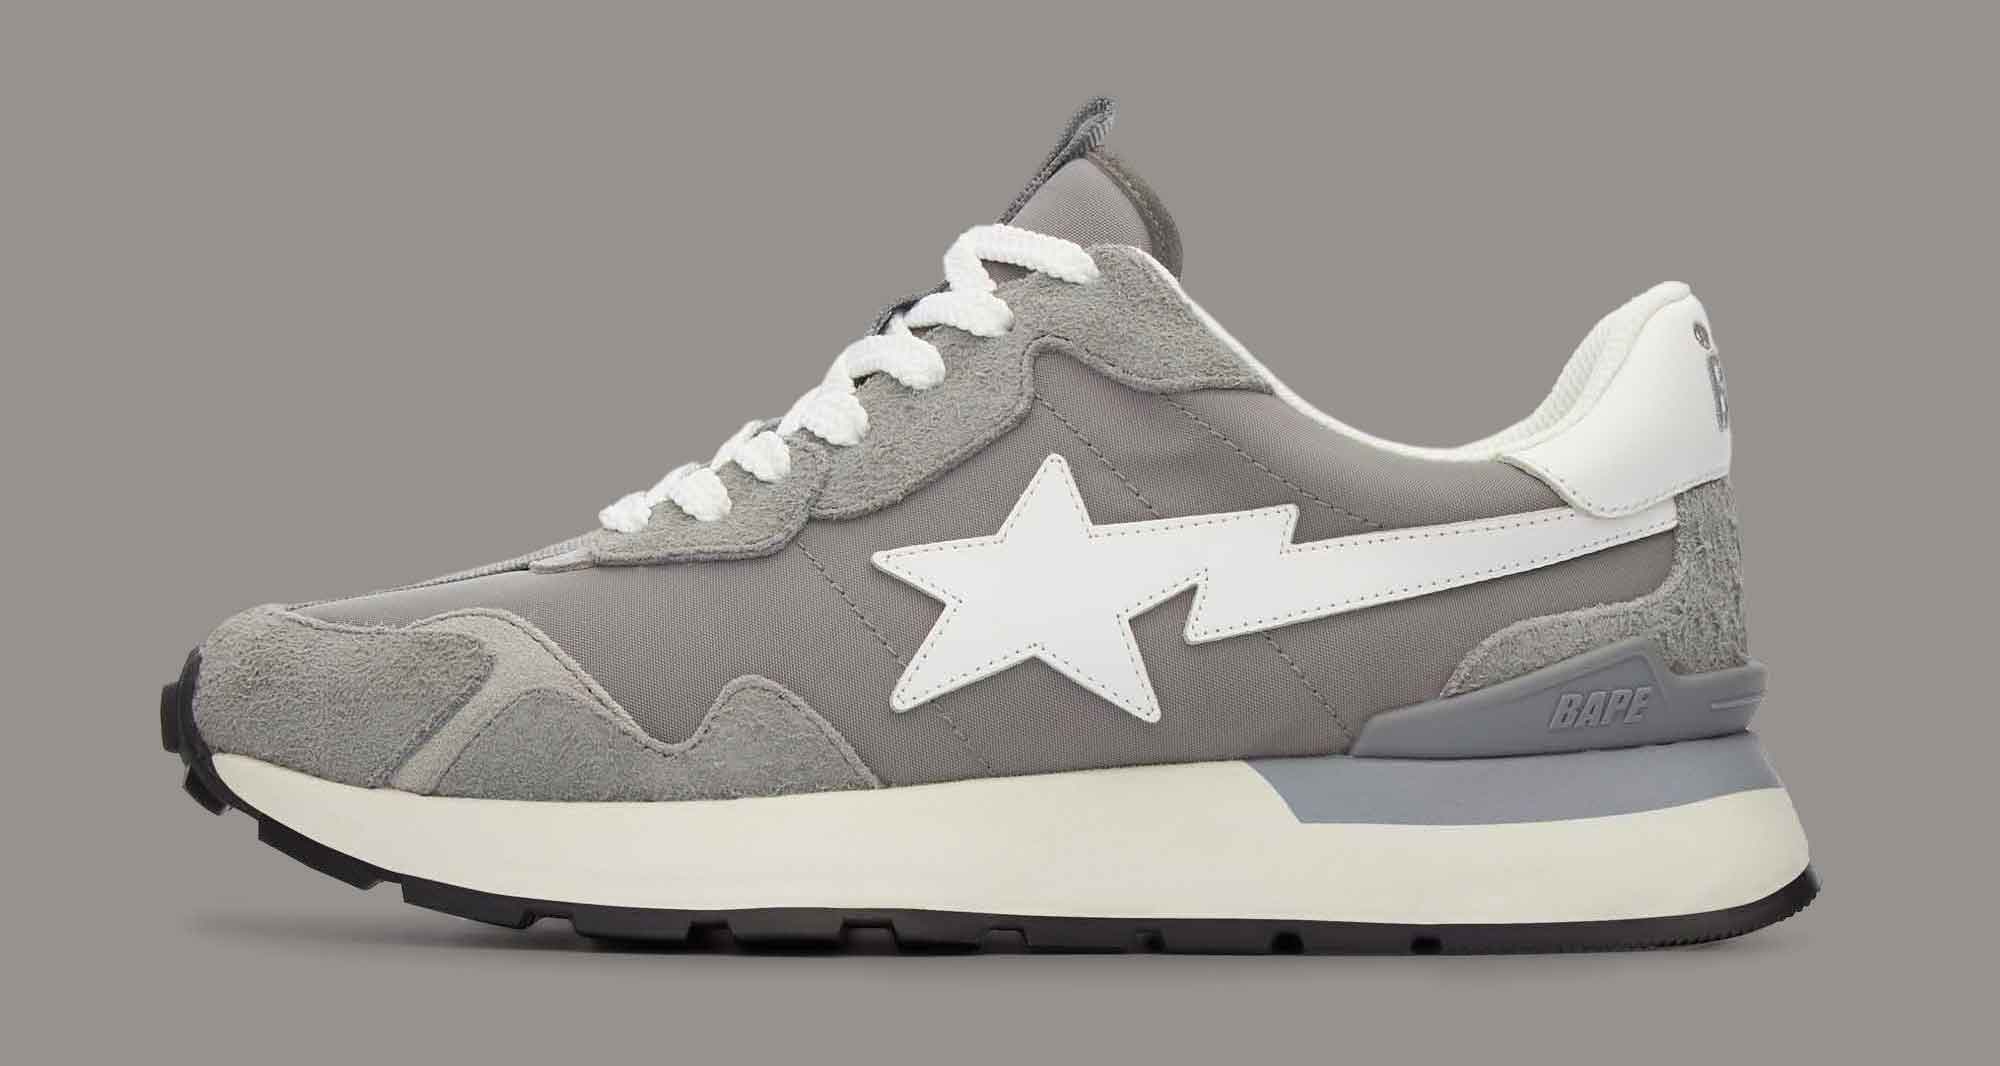 BAPE’s Latest Road Sta Express Arrives in a Clean “Grey/White” Outfit